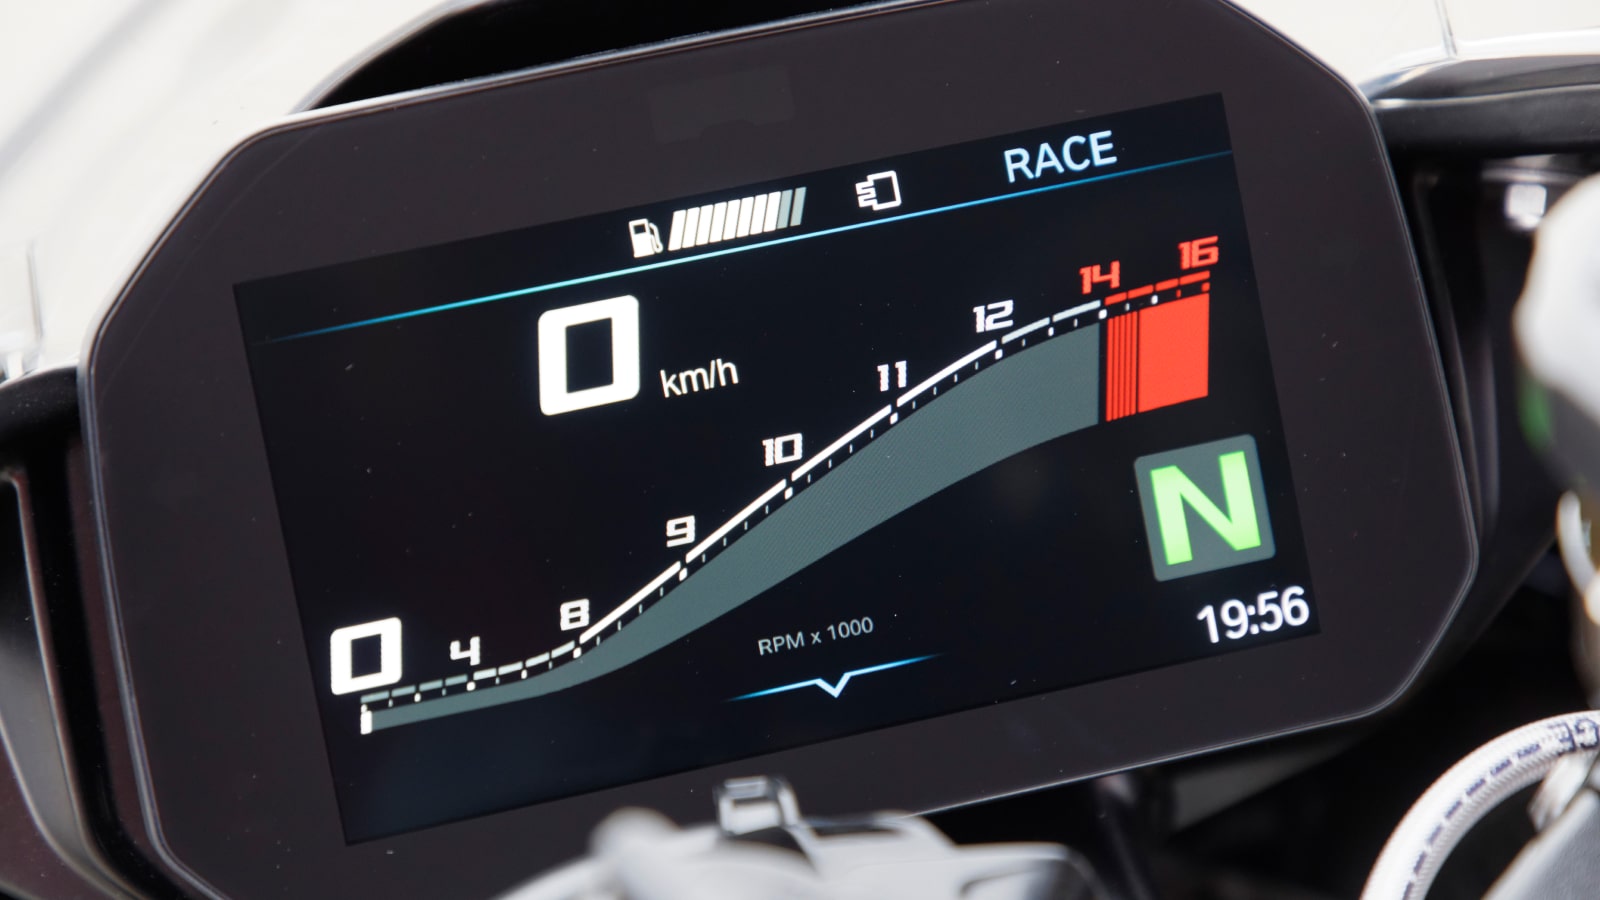 BMW S1000RR Digital Interface showing rev counter and speed